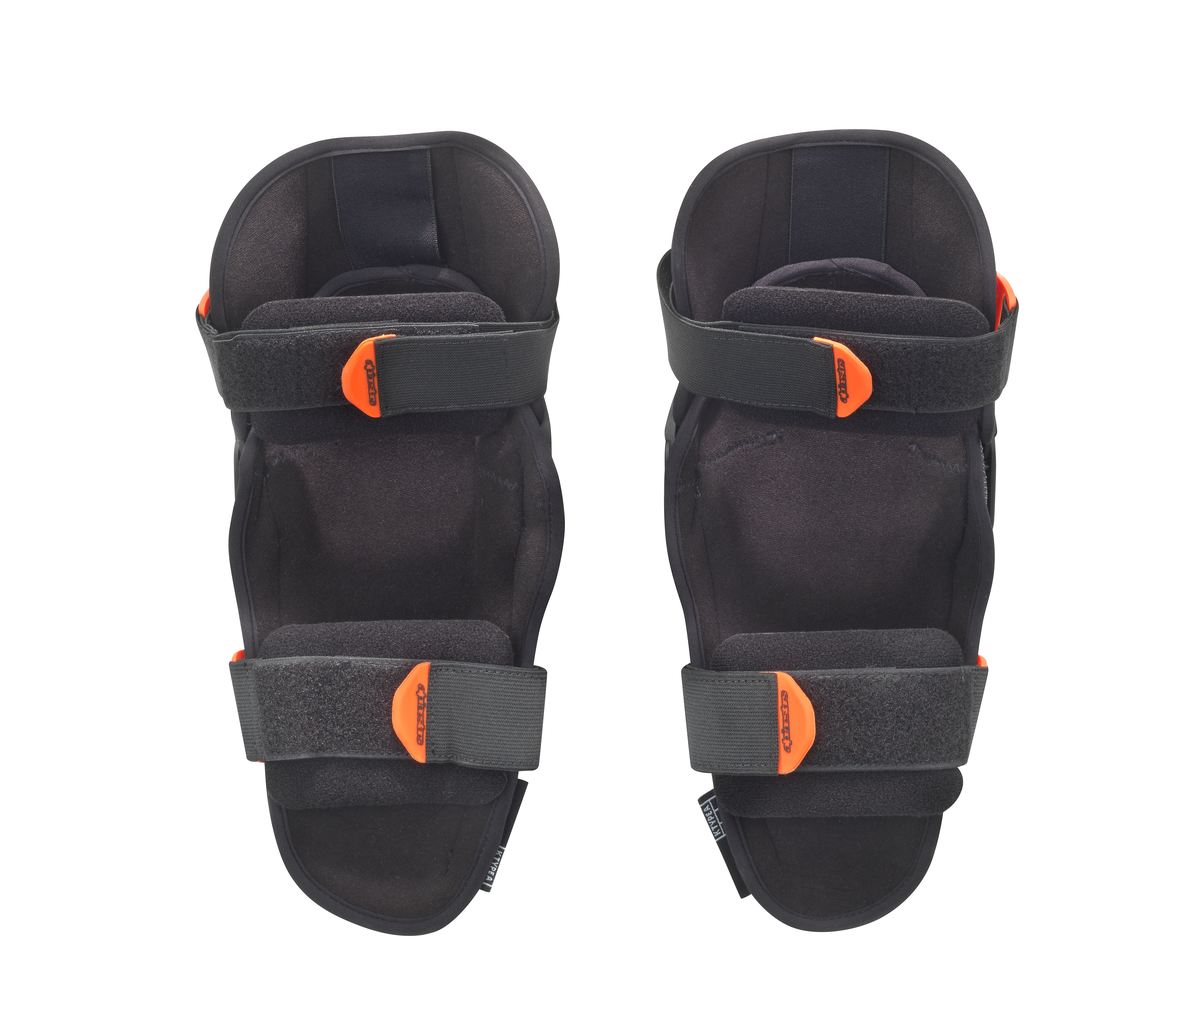 SX-1 YOUTH KNEE PROTECTOR